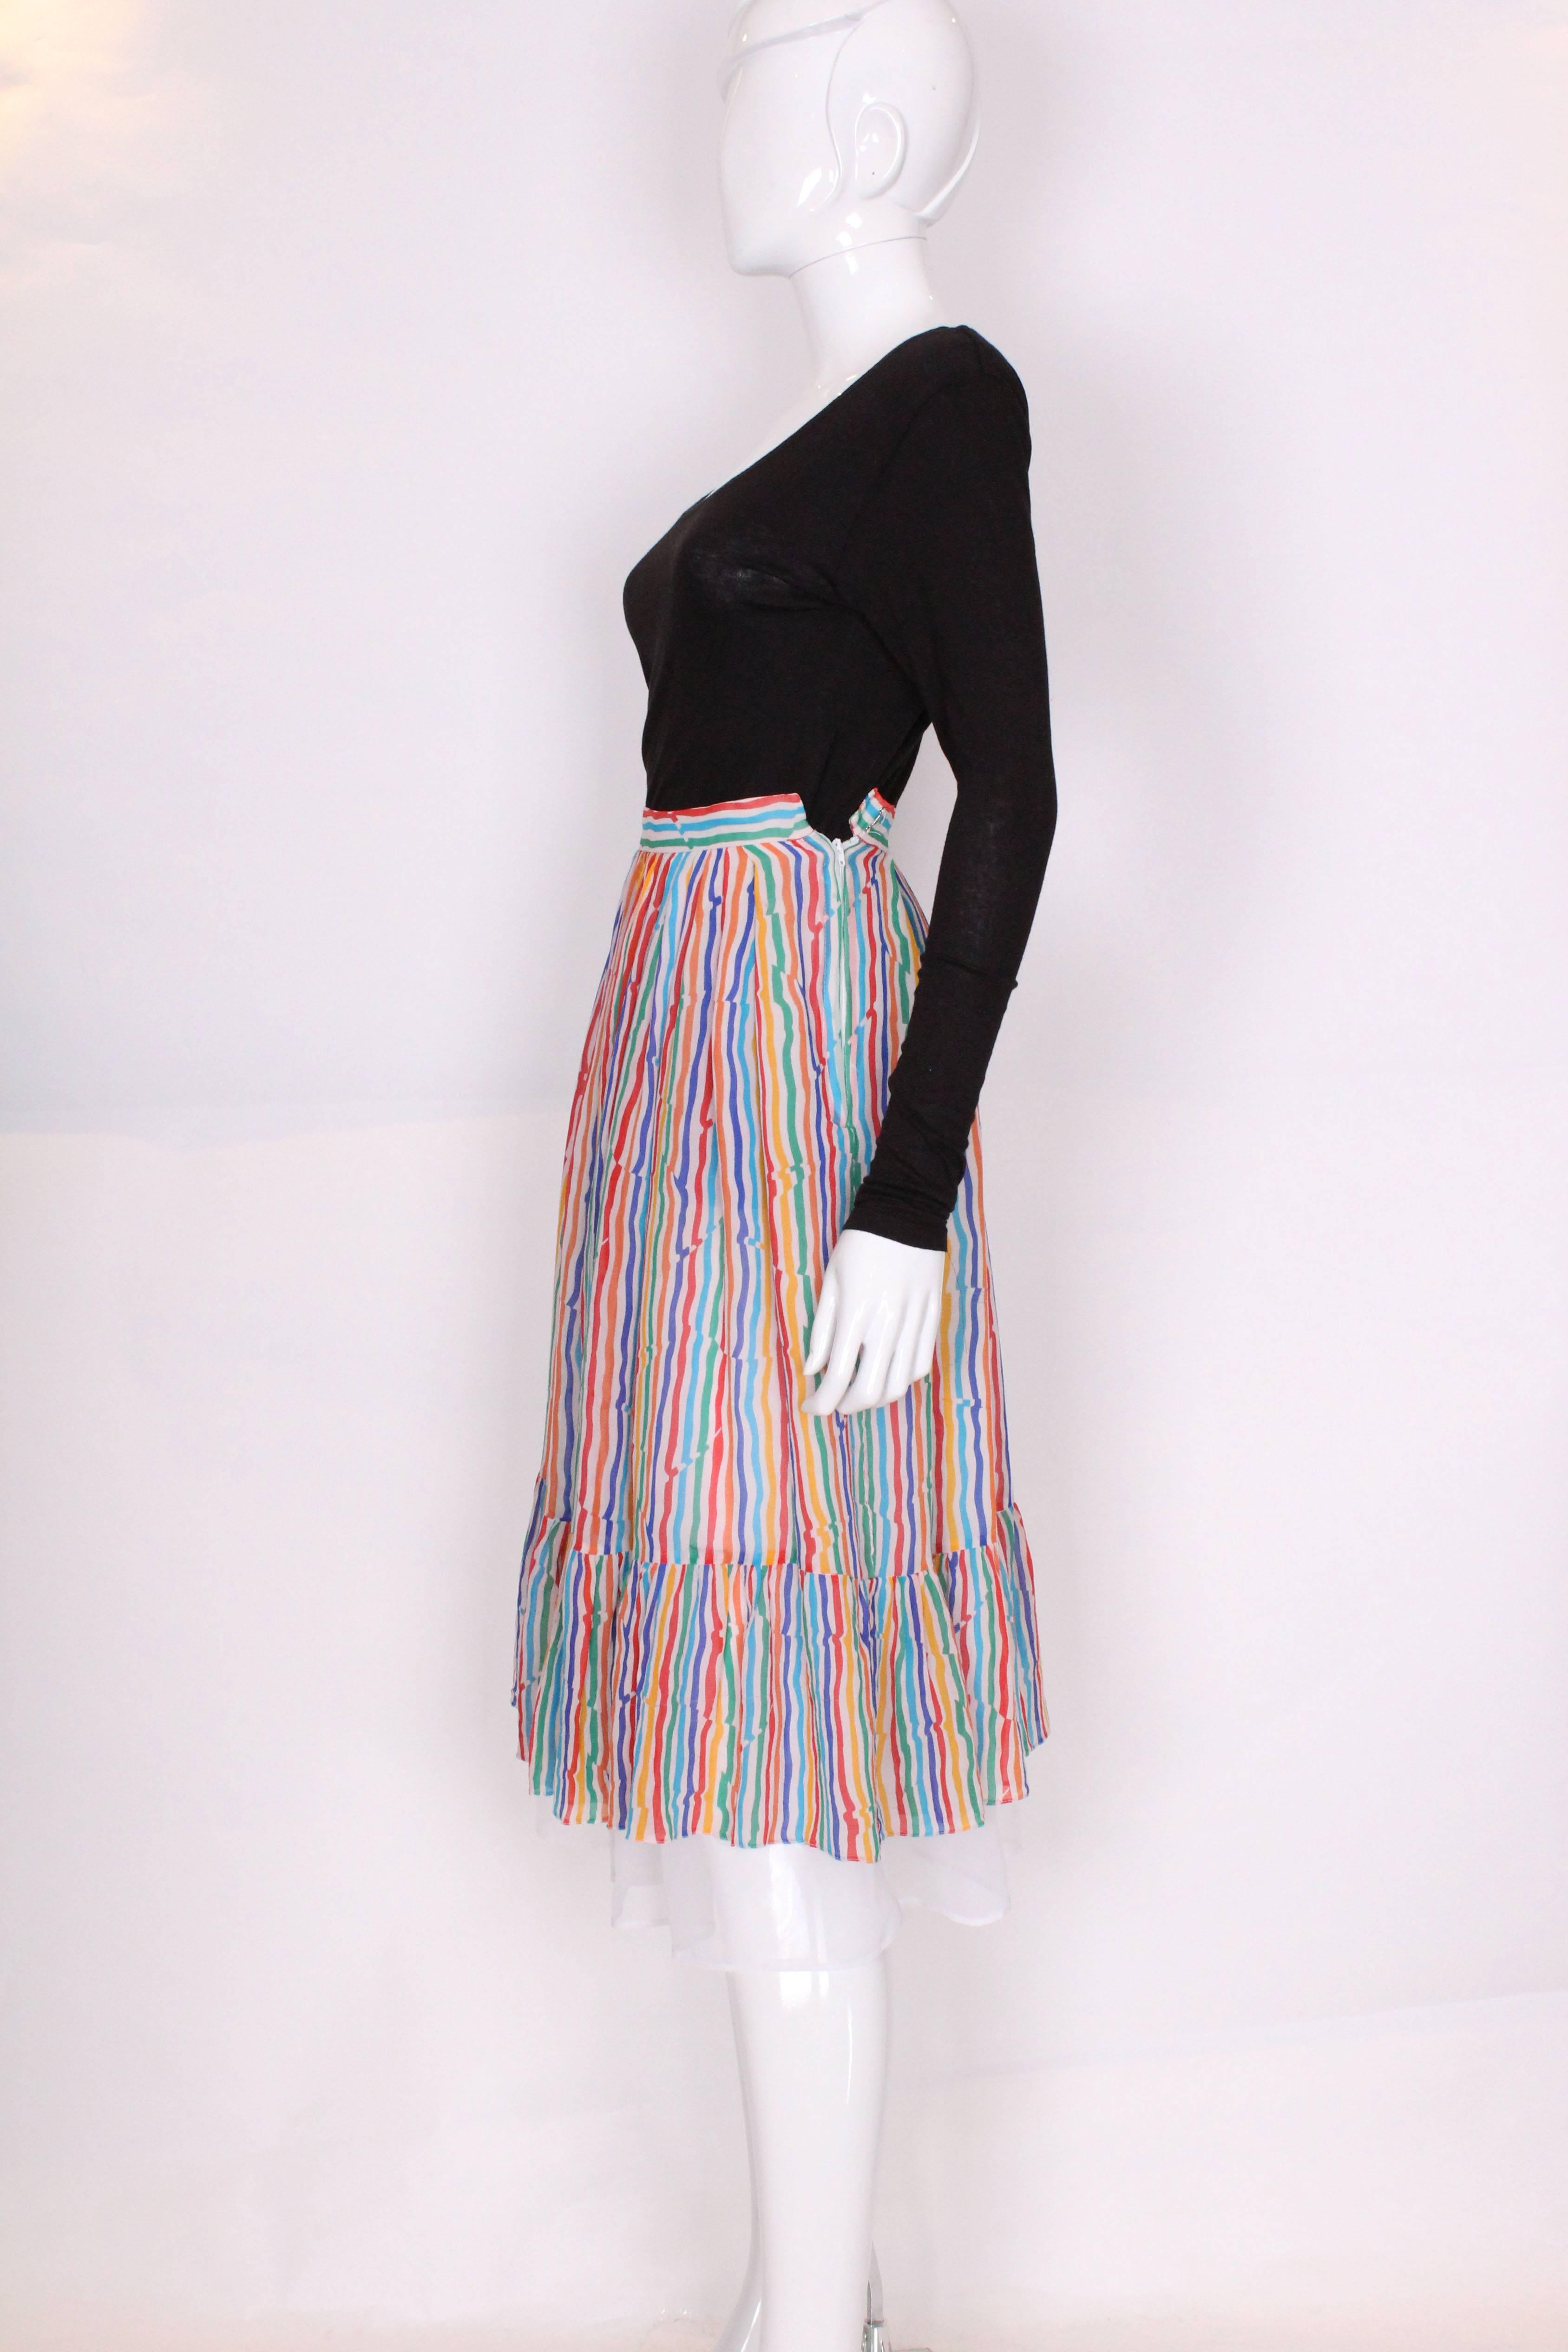 Caroline Charles Stripe Silk Multi Coloured Skirt In Excellent Condition For Sale In London, GB